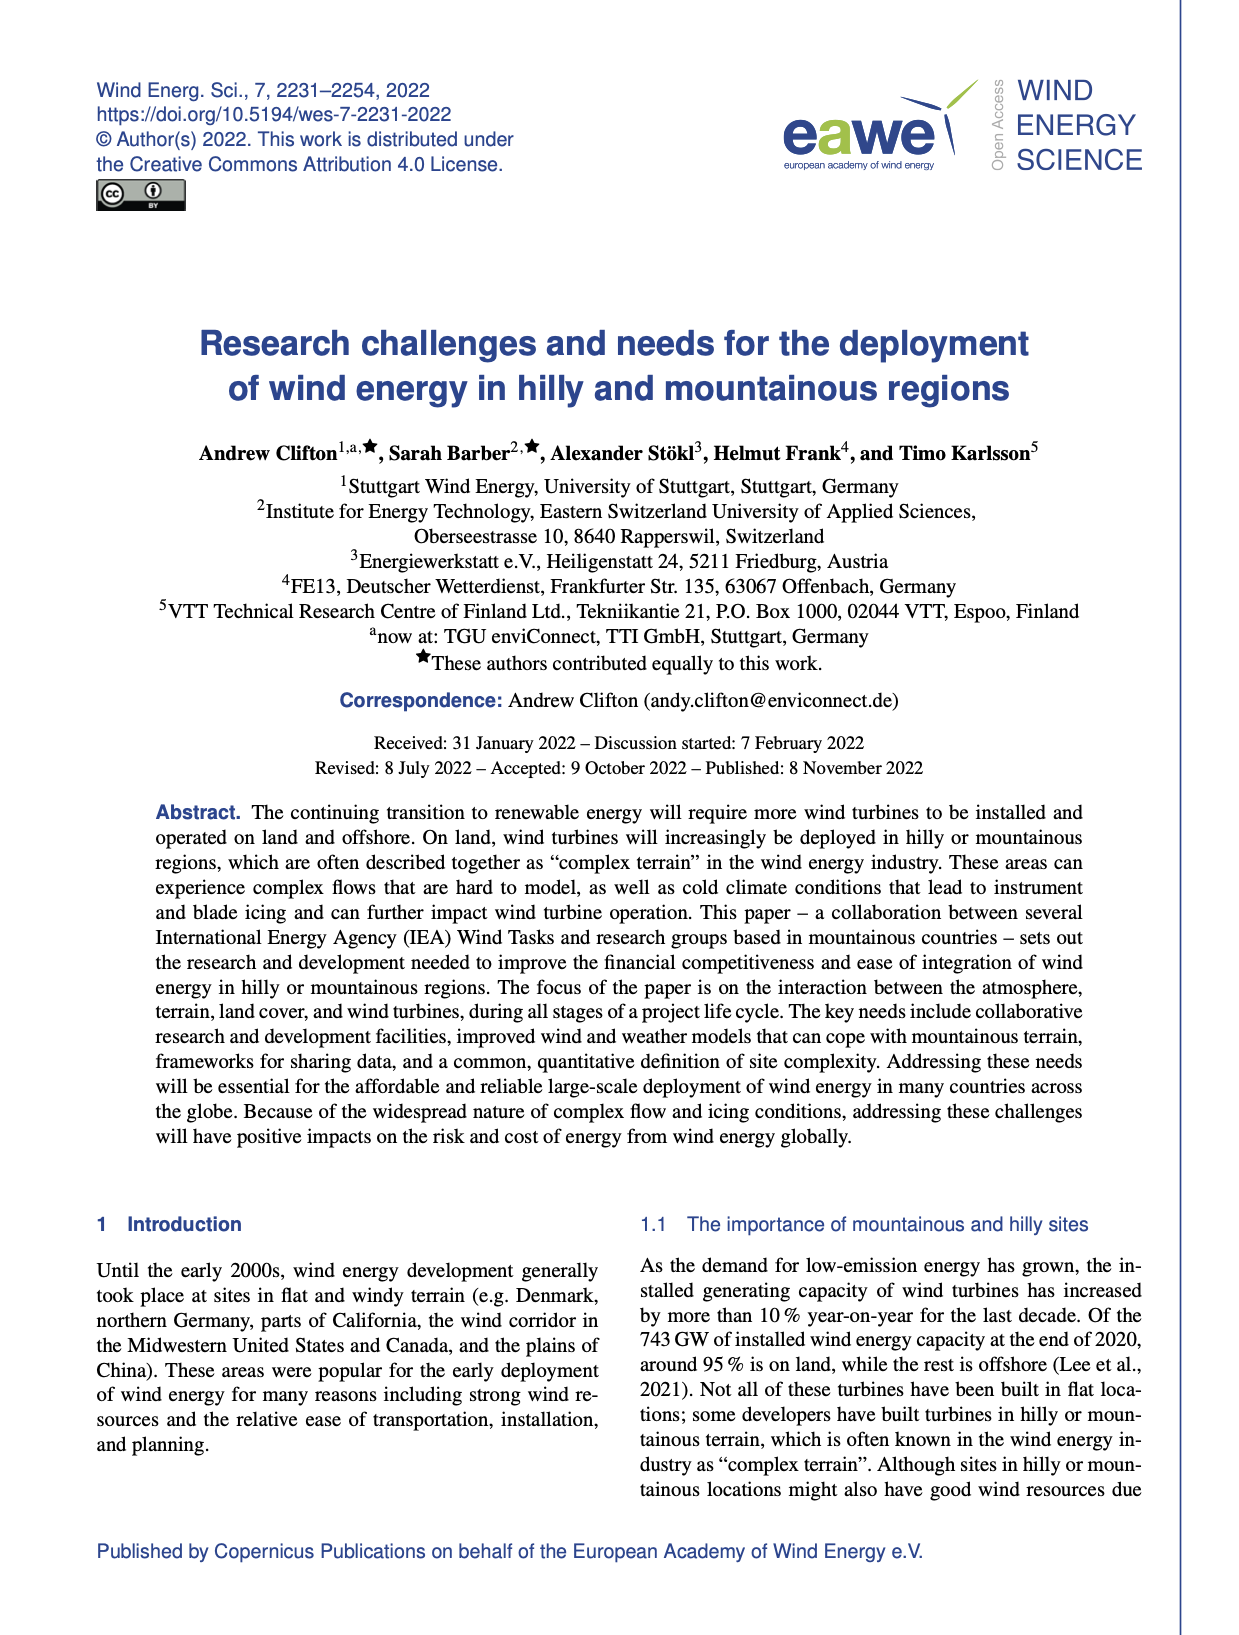 Research challenges and needs for the deployment of wind energy in hilly and mountainous regions